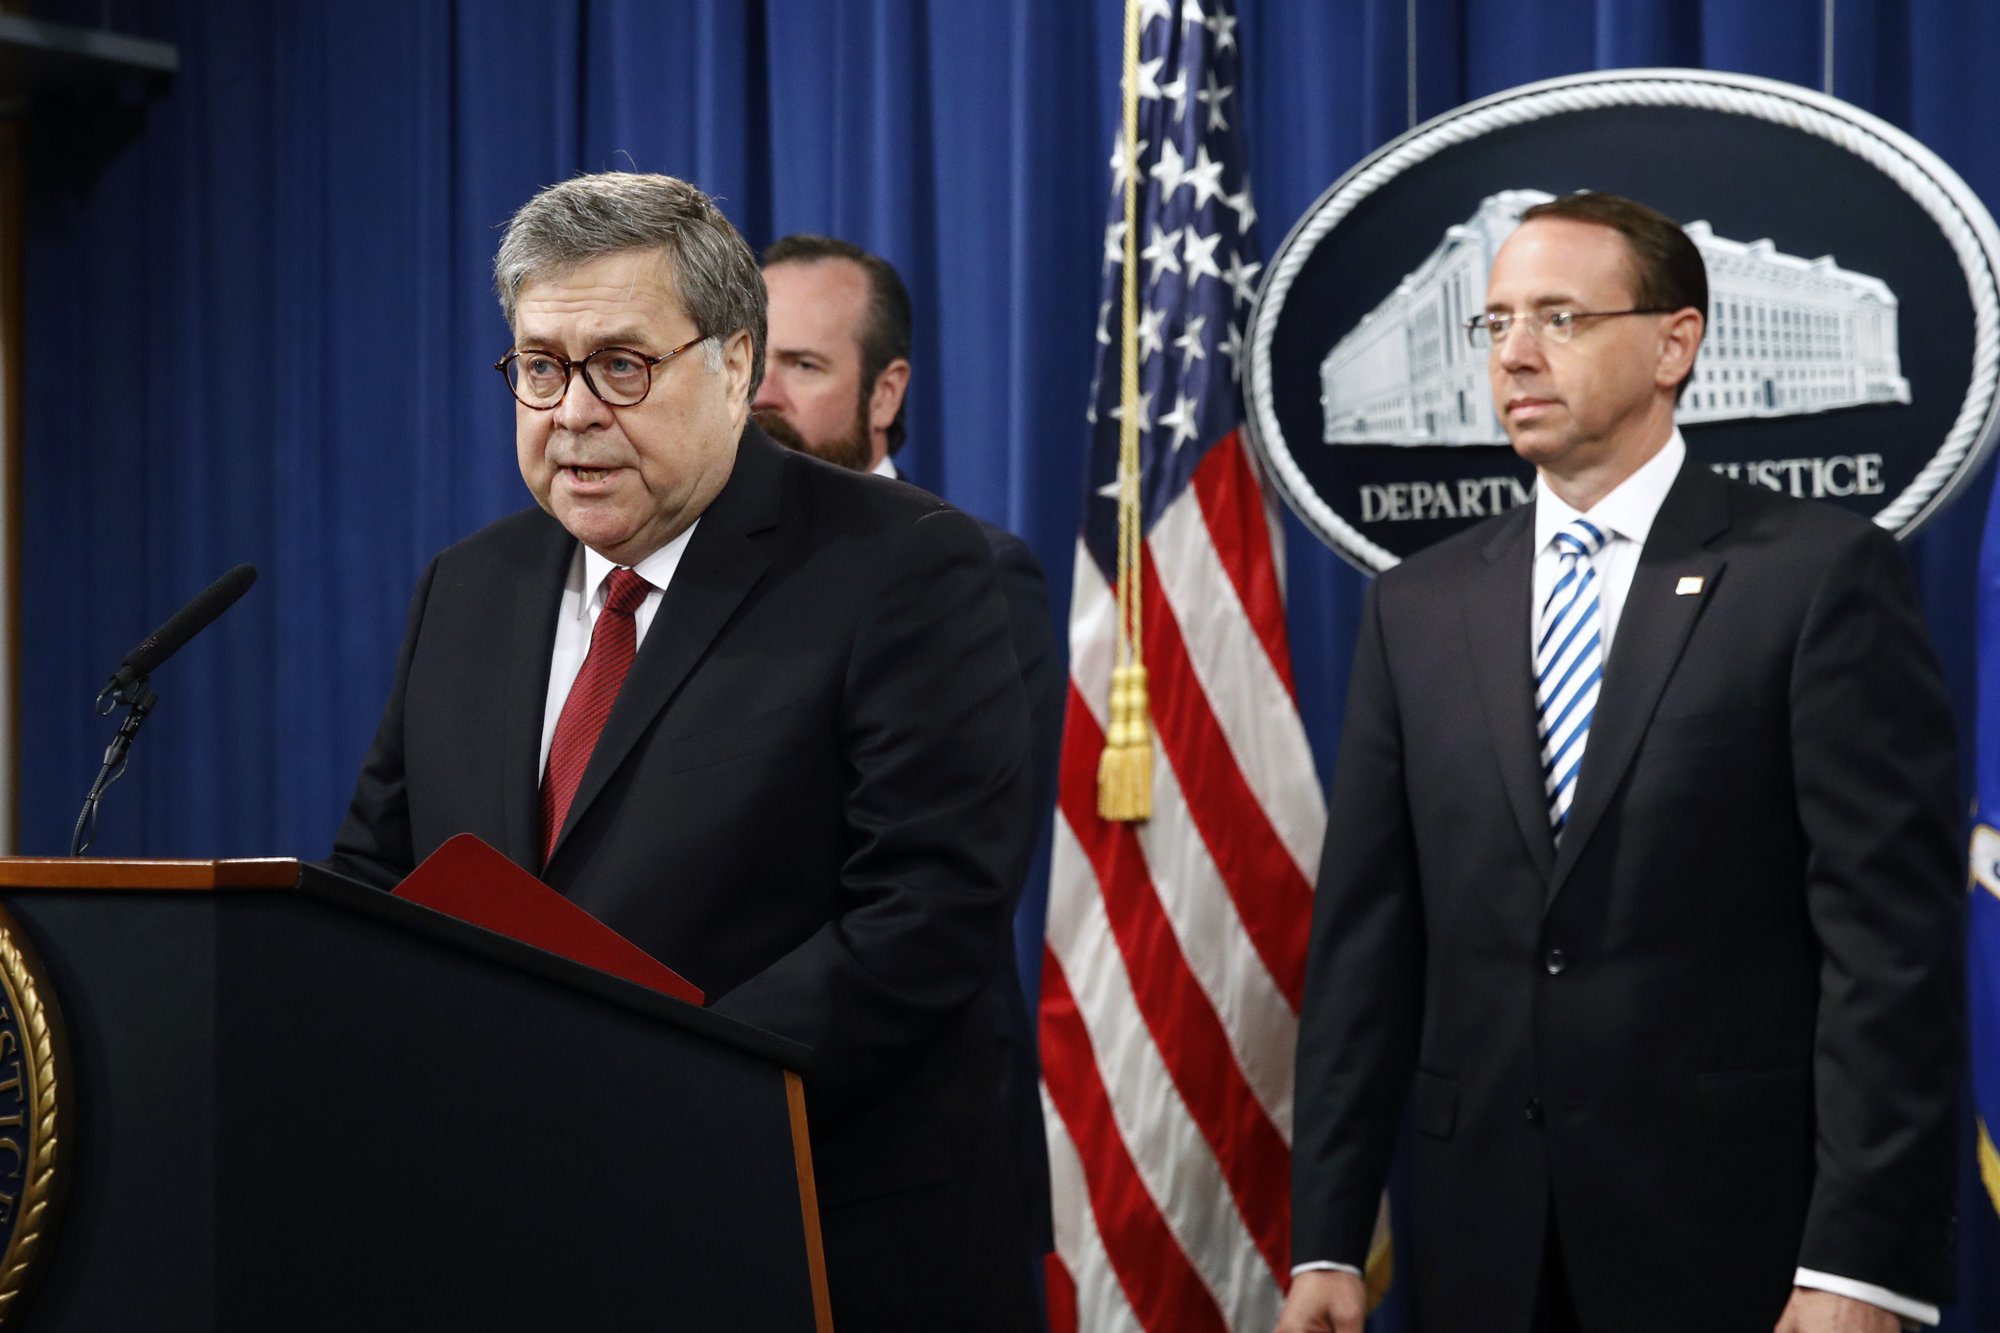 AG Barr: “No Collusion” Between Trump Campaign And Russia